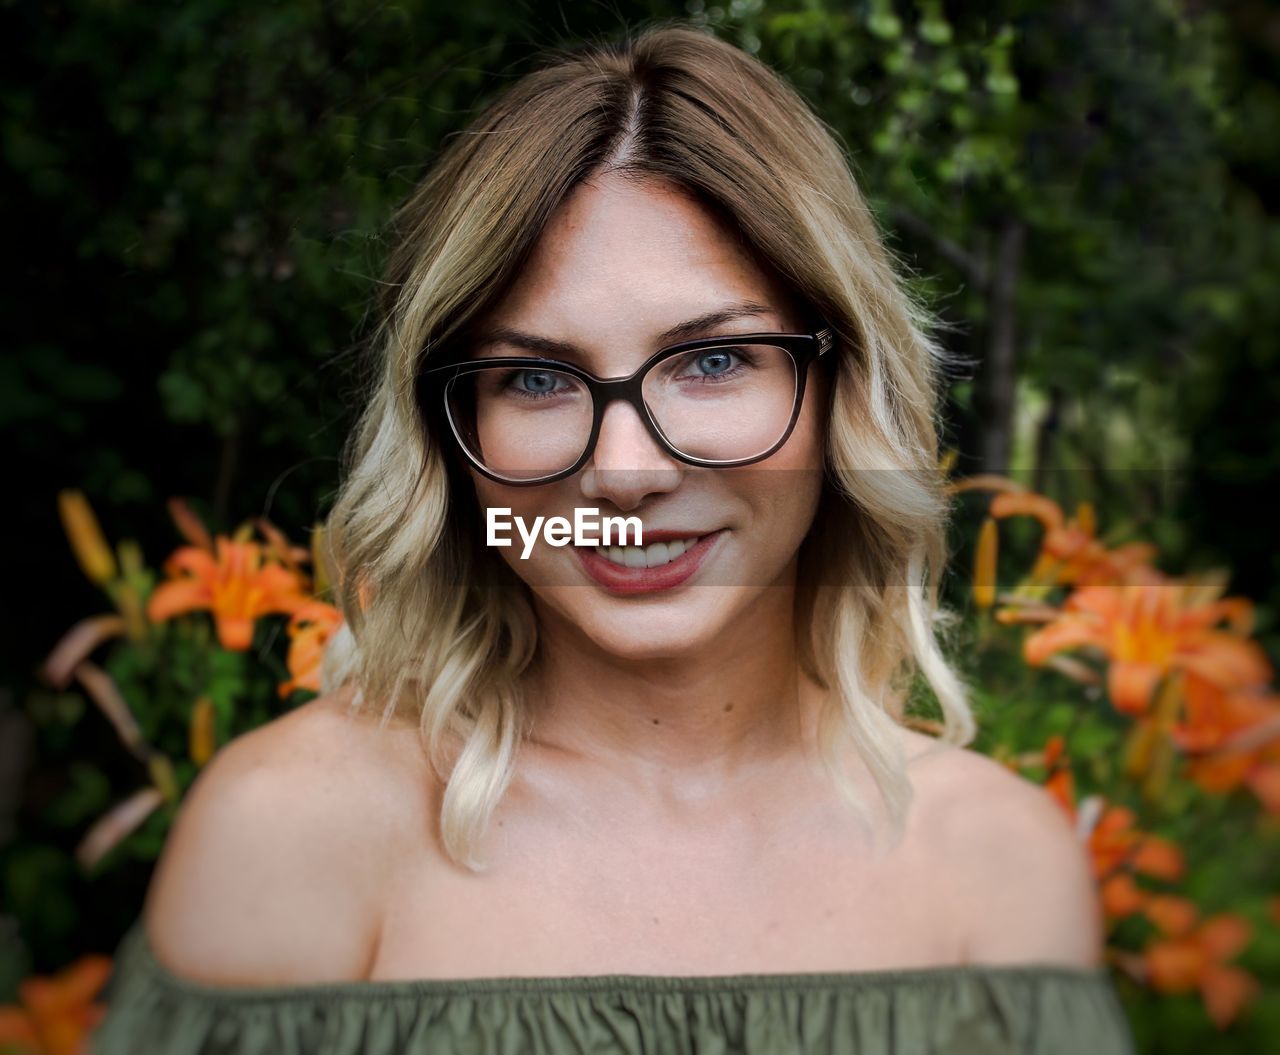 Close-up portrait of young woman wearing eyeglasses against plants